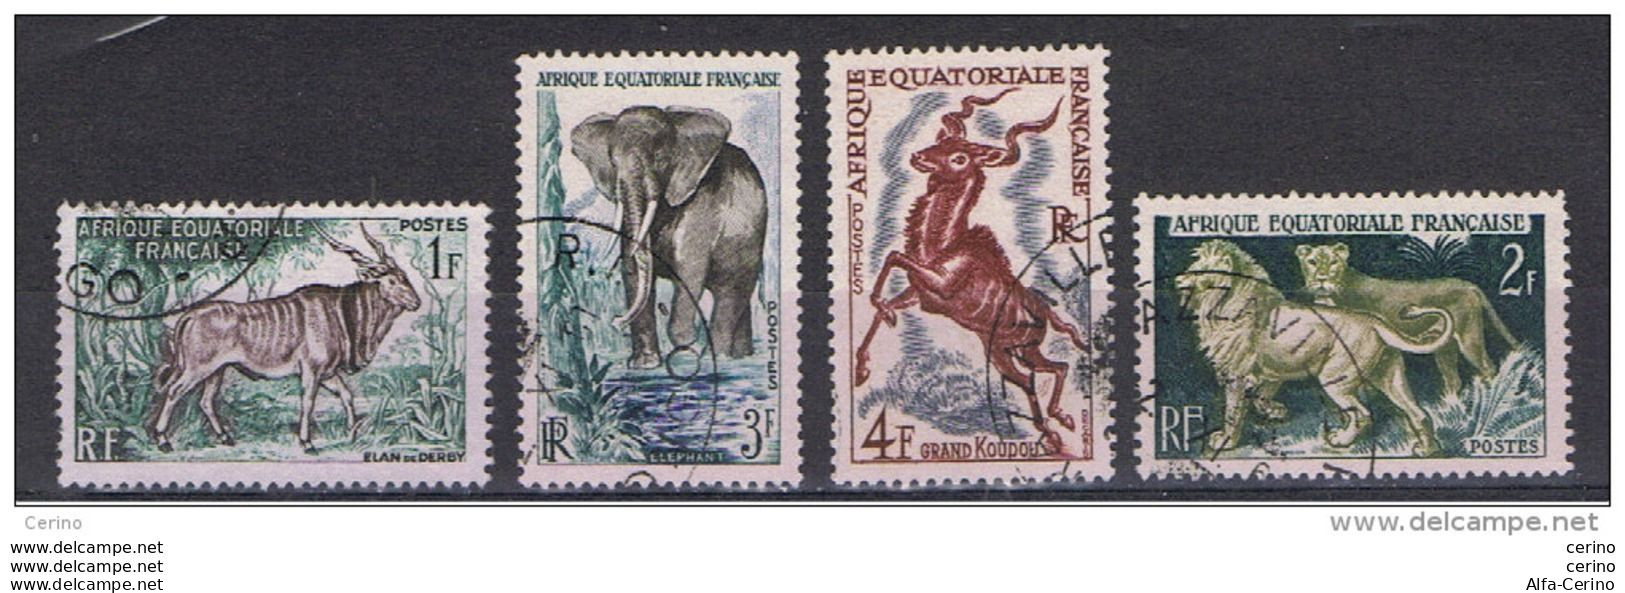 AFR..EQUATORIALE  FRANCESE:  1957  FAUNA  AFRICANA  -  S. CPL. 4  VAL. US. -  YV/TELL. 238/41 - Used Stamps